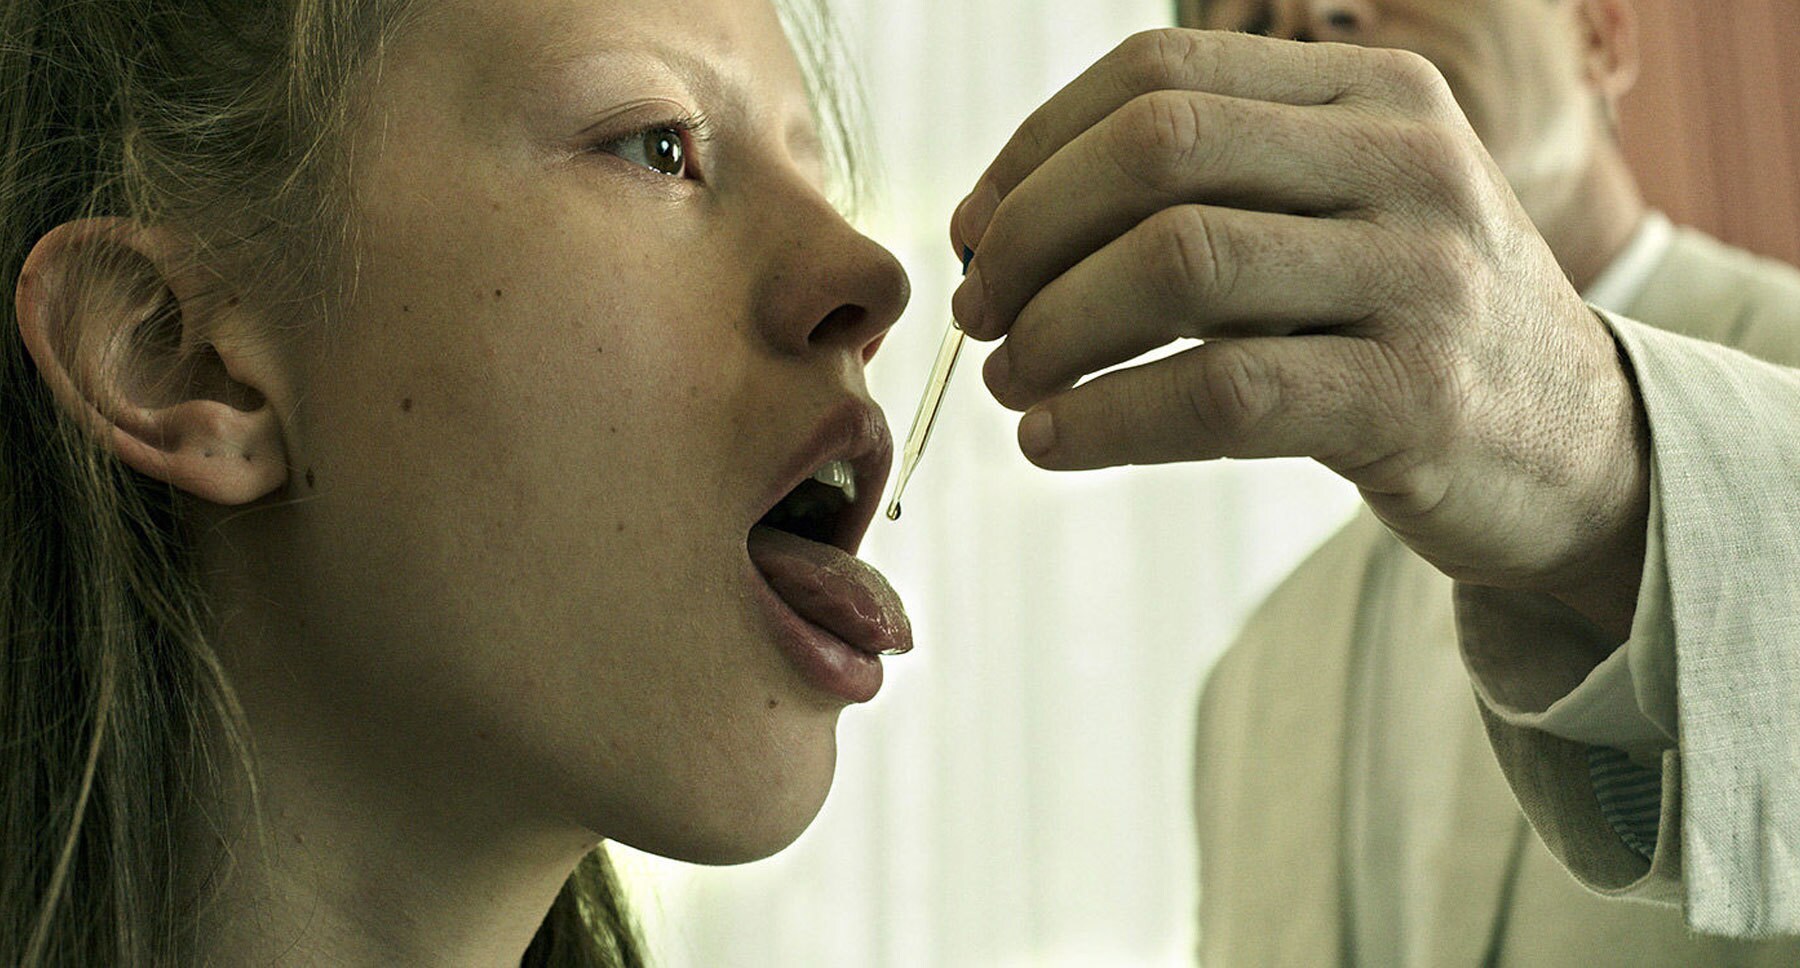 Actor Jason Isaacs (as Volmer) gives Actor Mia Goth (as Hannah) medicine through a dropper in the film "A Cure for Wellness"